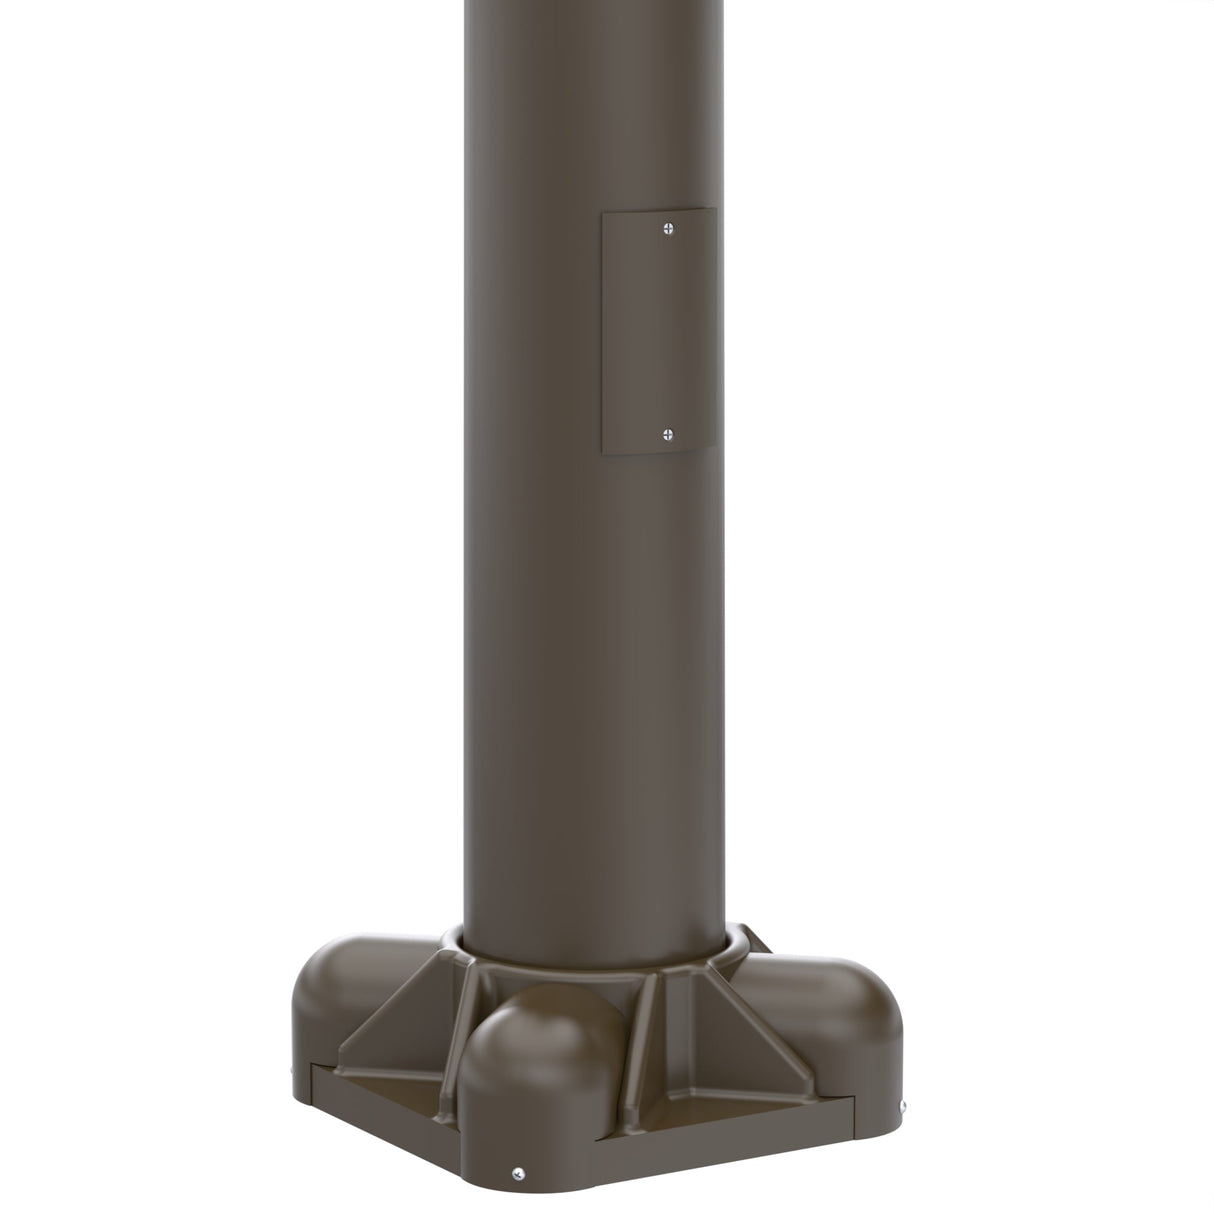 10' Tall x 4.0" Base OD x 3.0" Top OD x 0.125" Thick, Round Tapered Aluminum, Anchor Base Light Pole